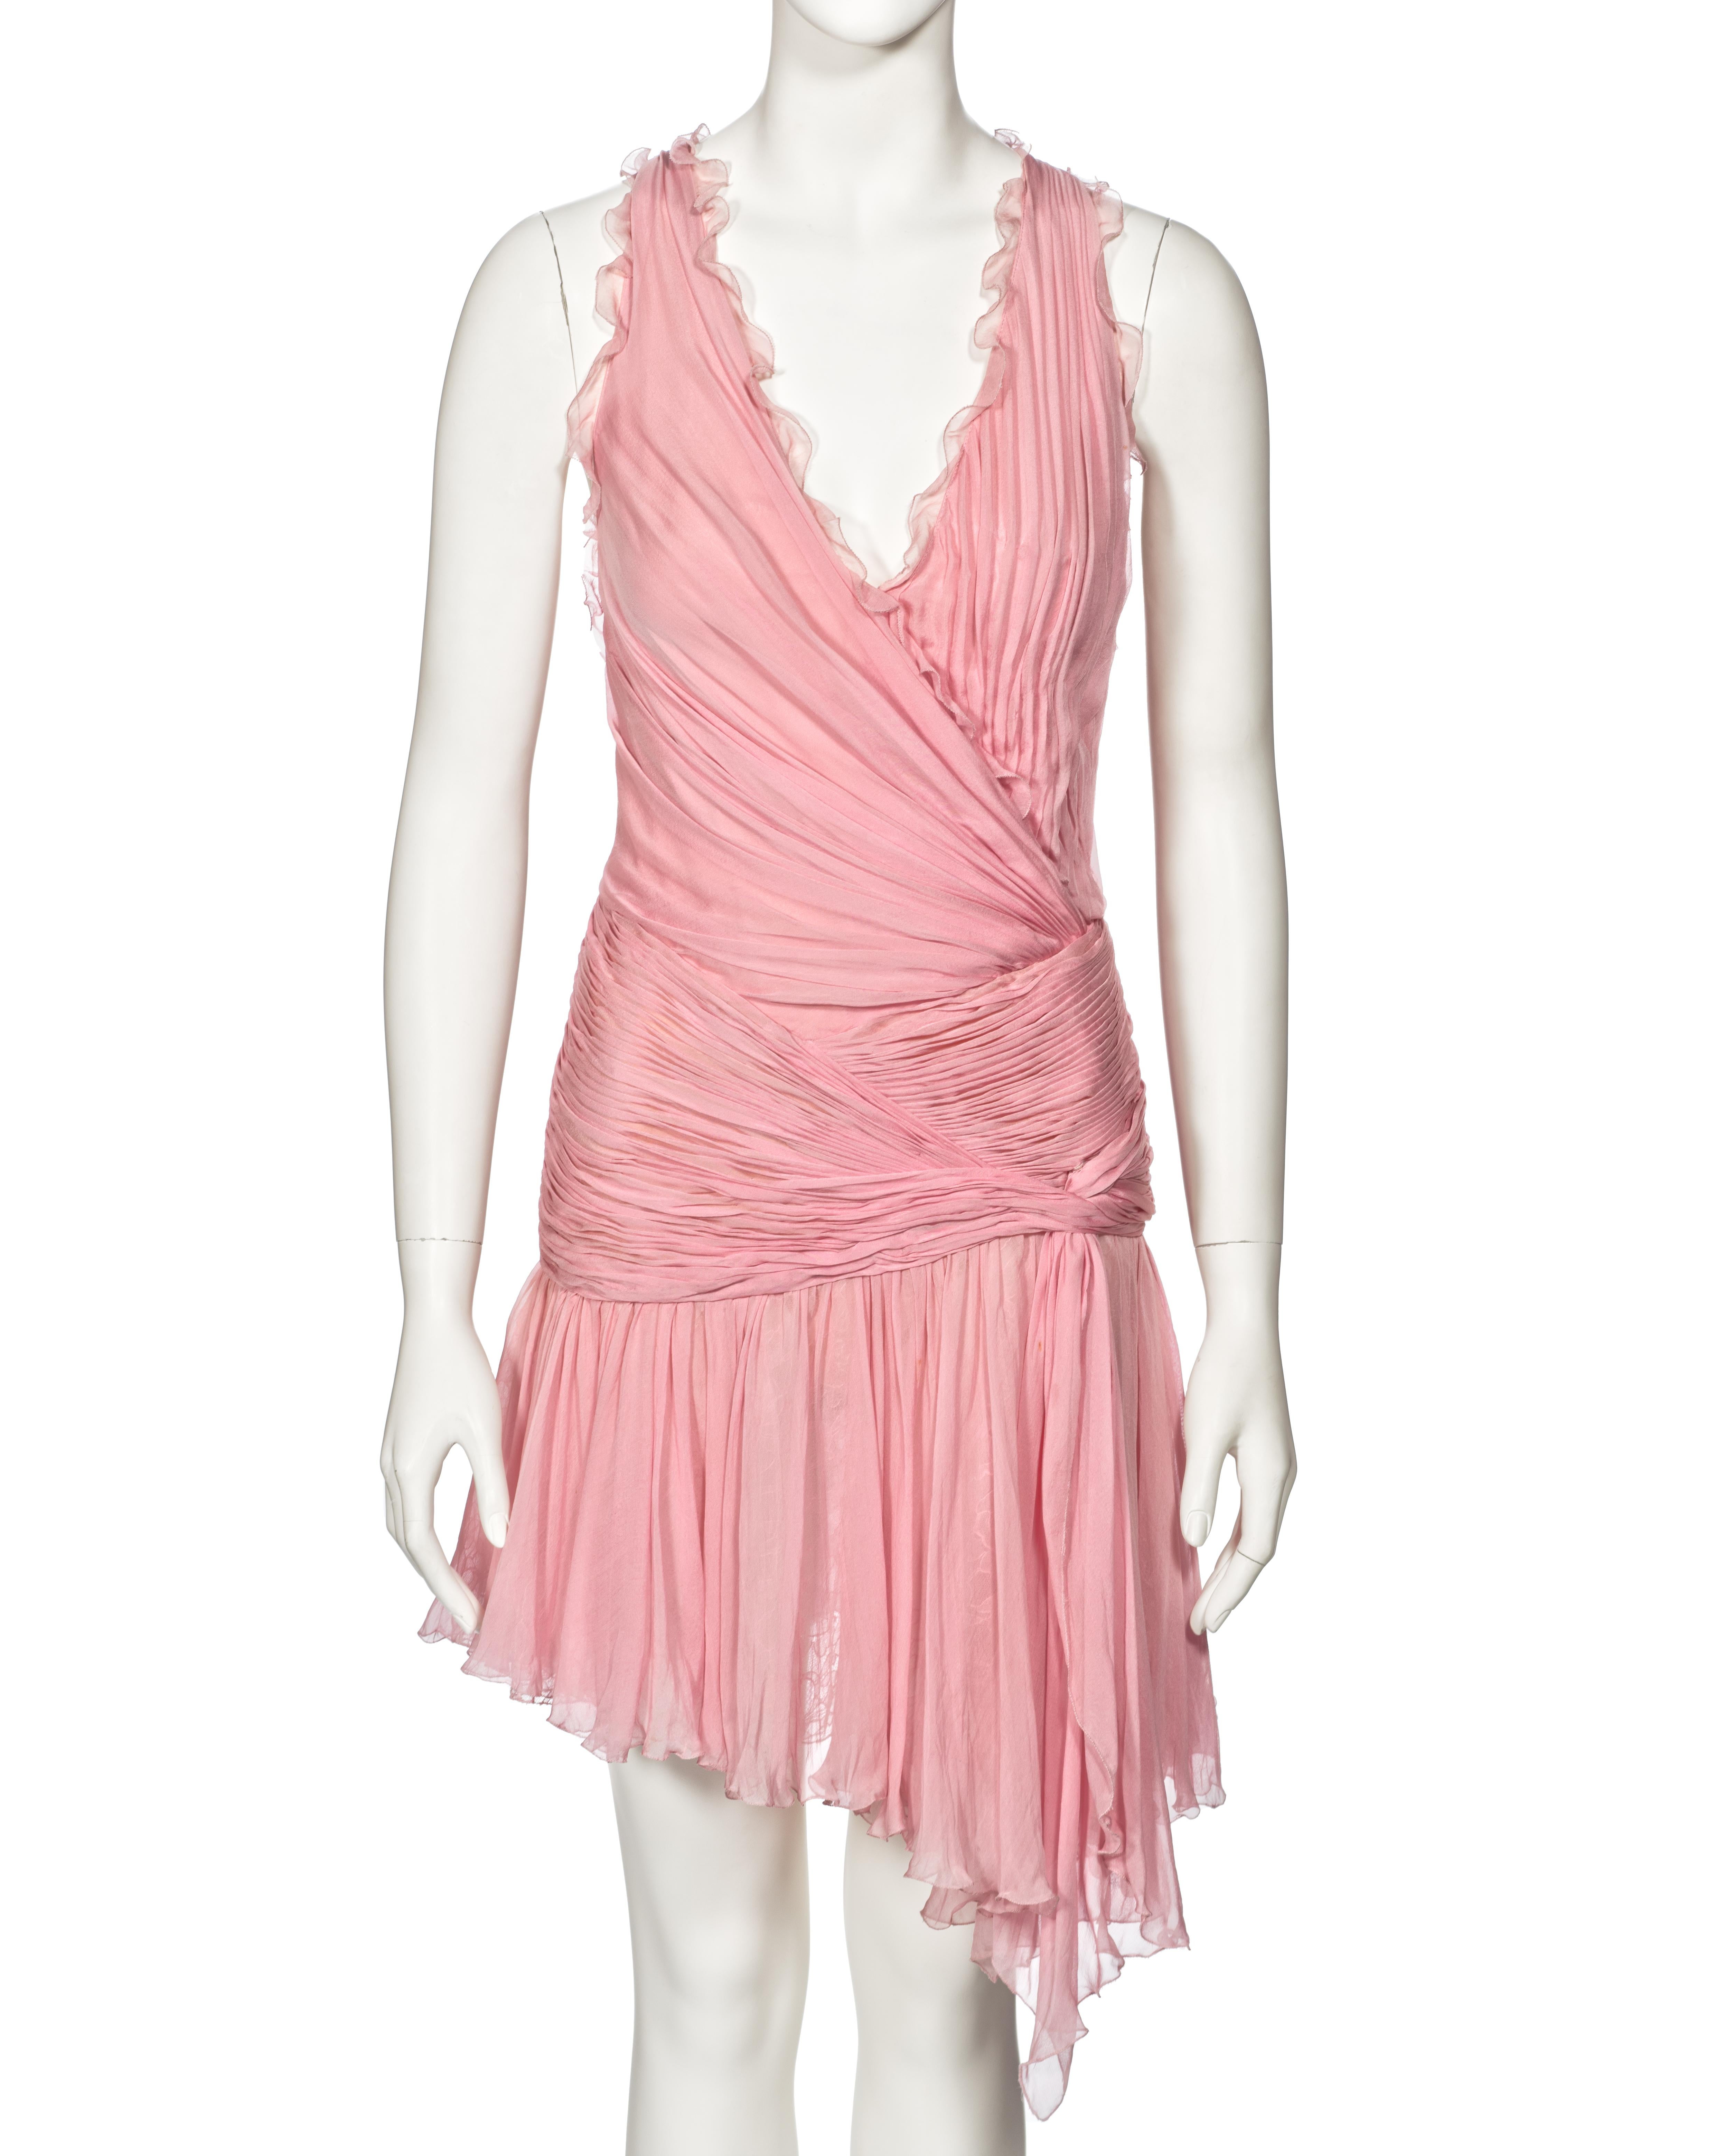 Women's Atelier Versace Couture Pink Pleated Silk and Lace Mini Dress, ss 2004 For Sale